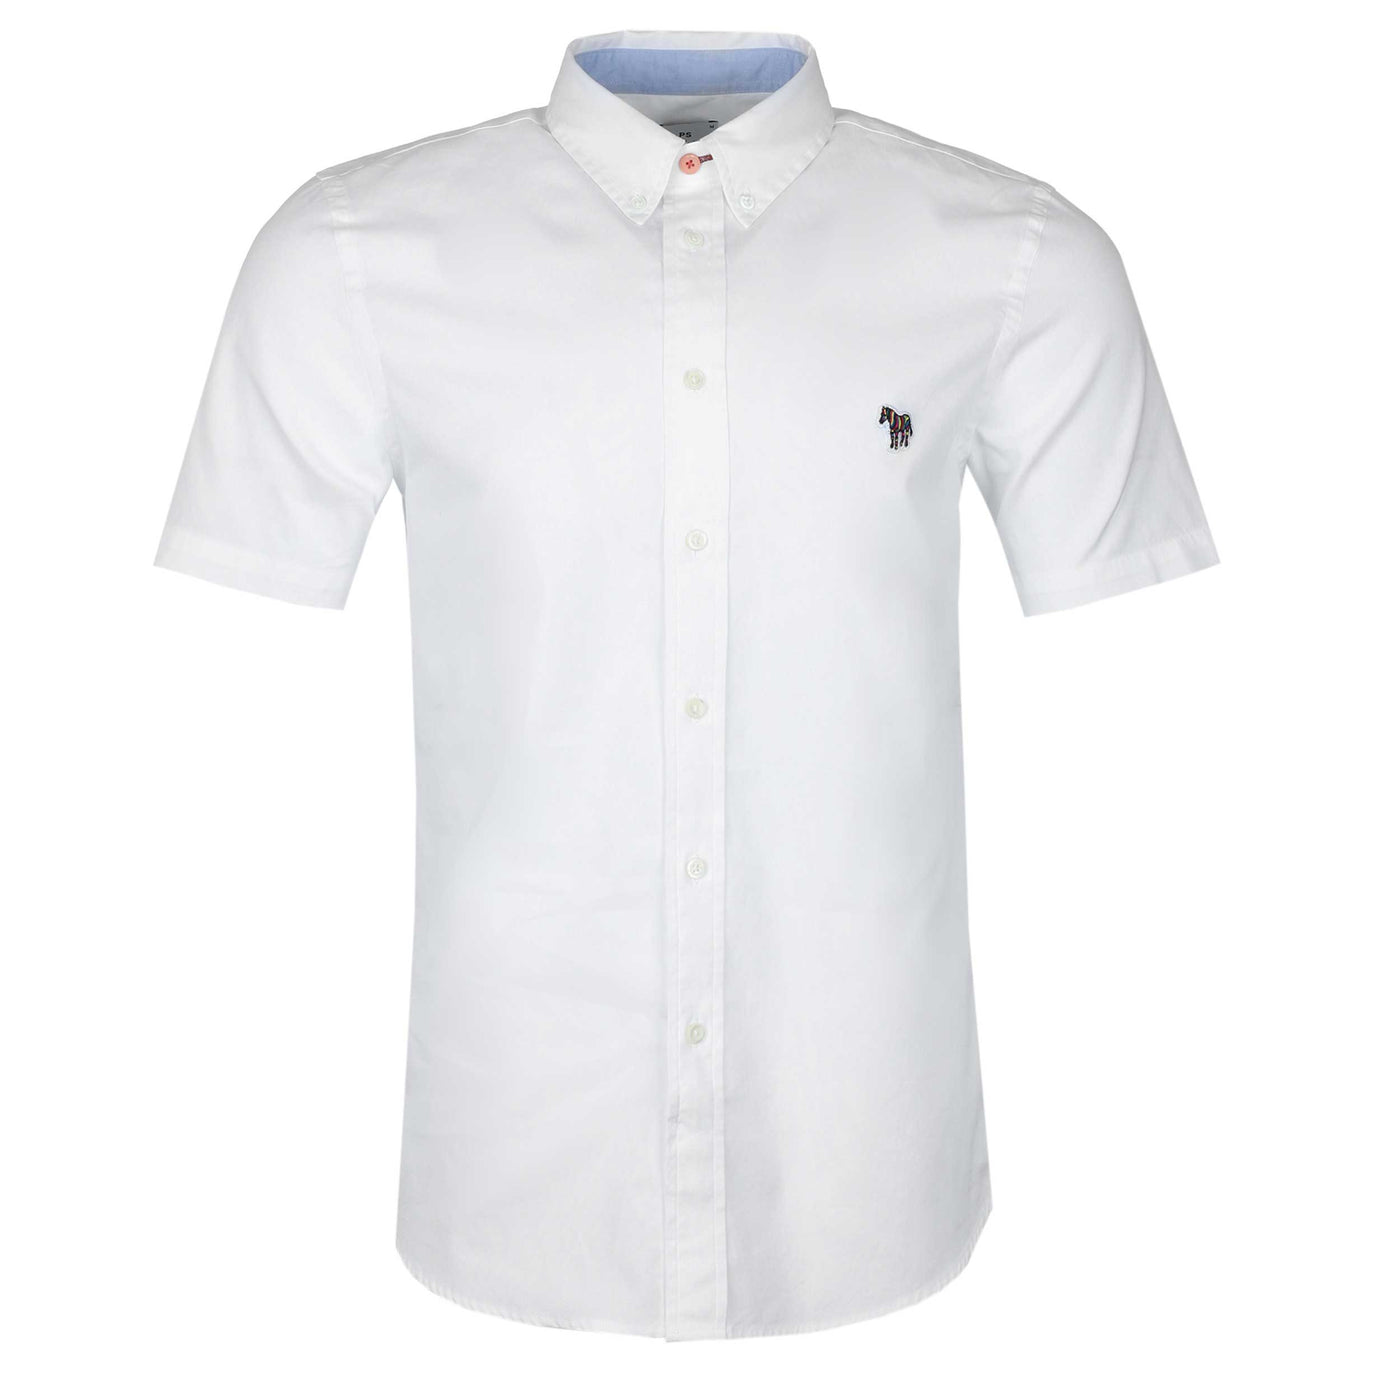 Paul Smith Tailored Fit SS Shirt in White